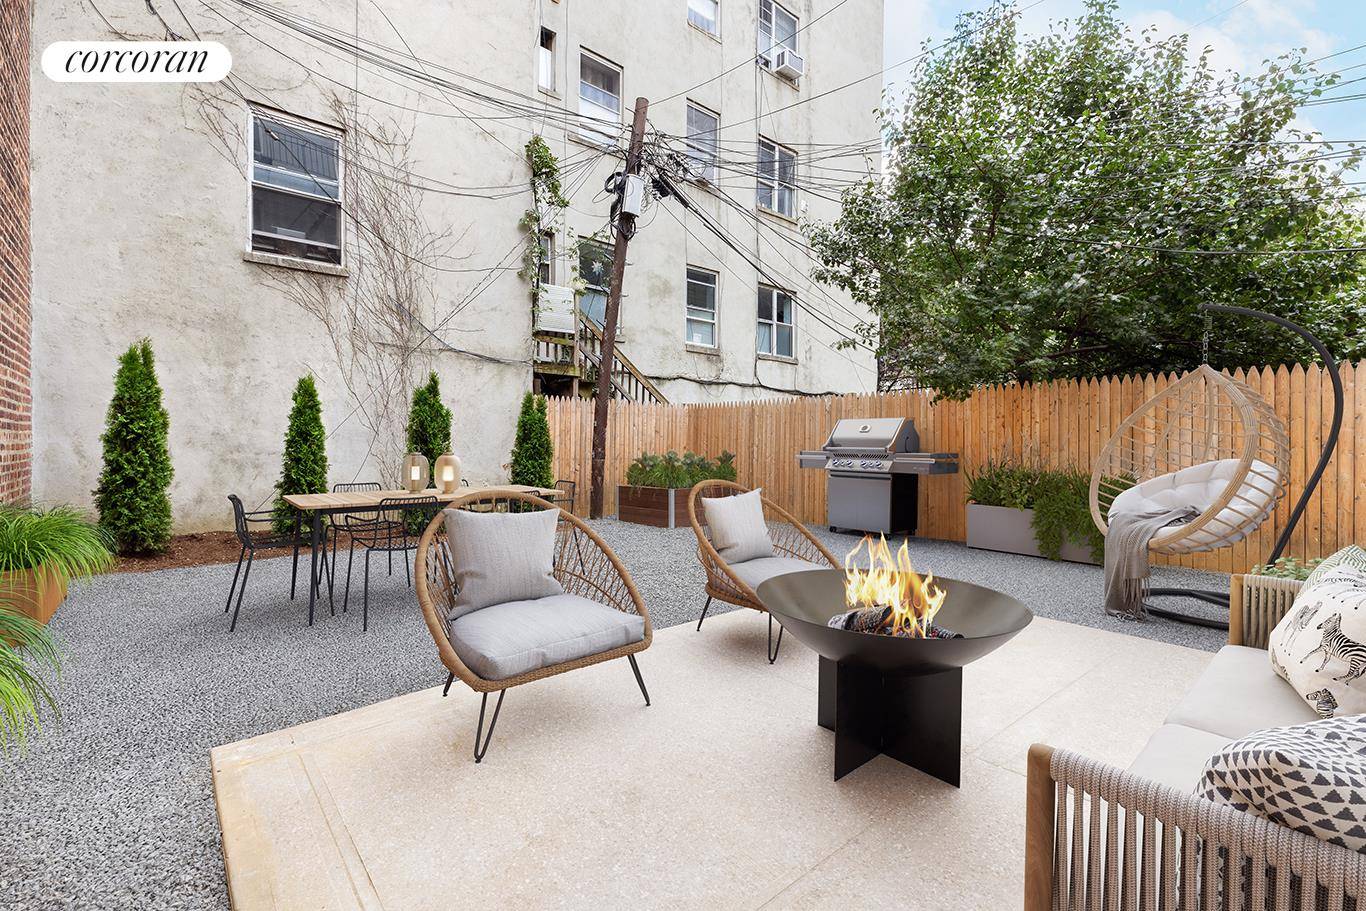 Discover the allure of this freshly renovated 2 bedroom, 2 bathroom apartment, featuring a spacious home office area and an exclusive 700 SqFt garden retreat.